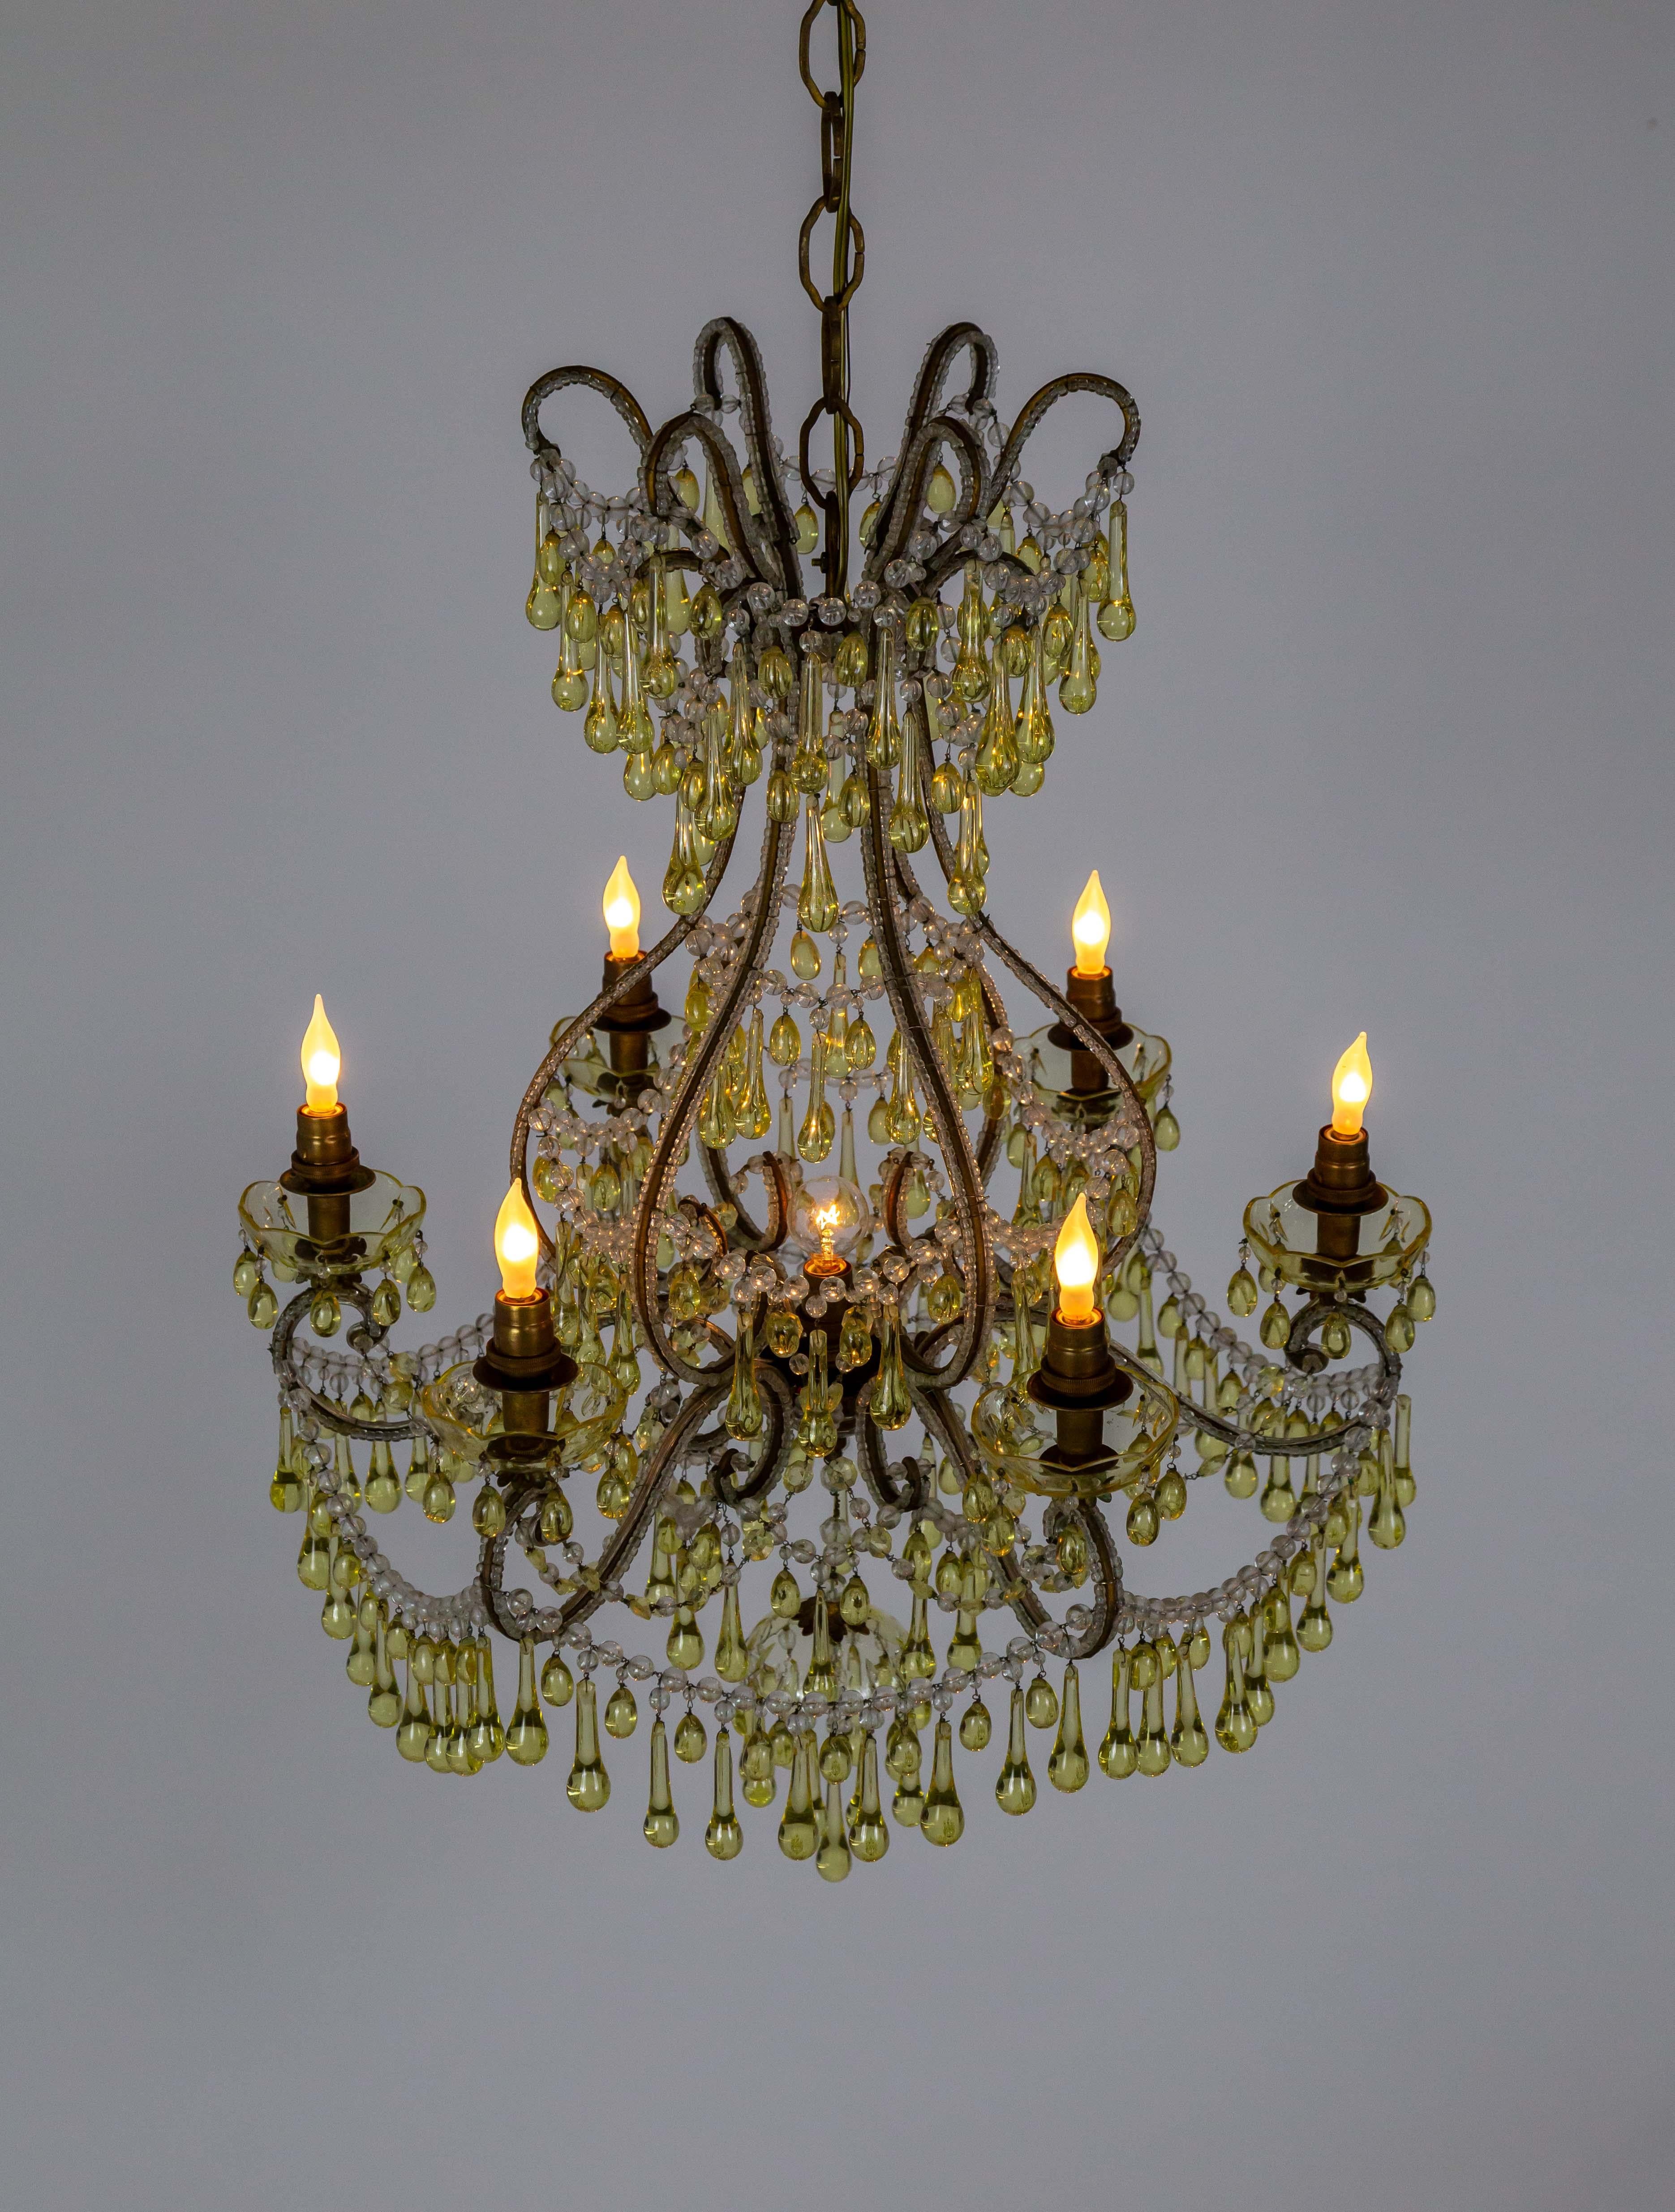 19th Century Rare Pale Yellow Crystal Drops Birdcage Chandelier For Sale 7